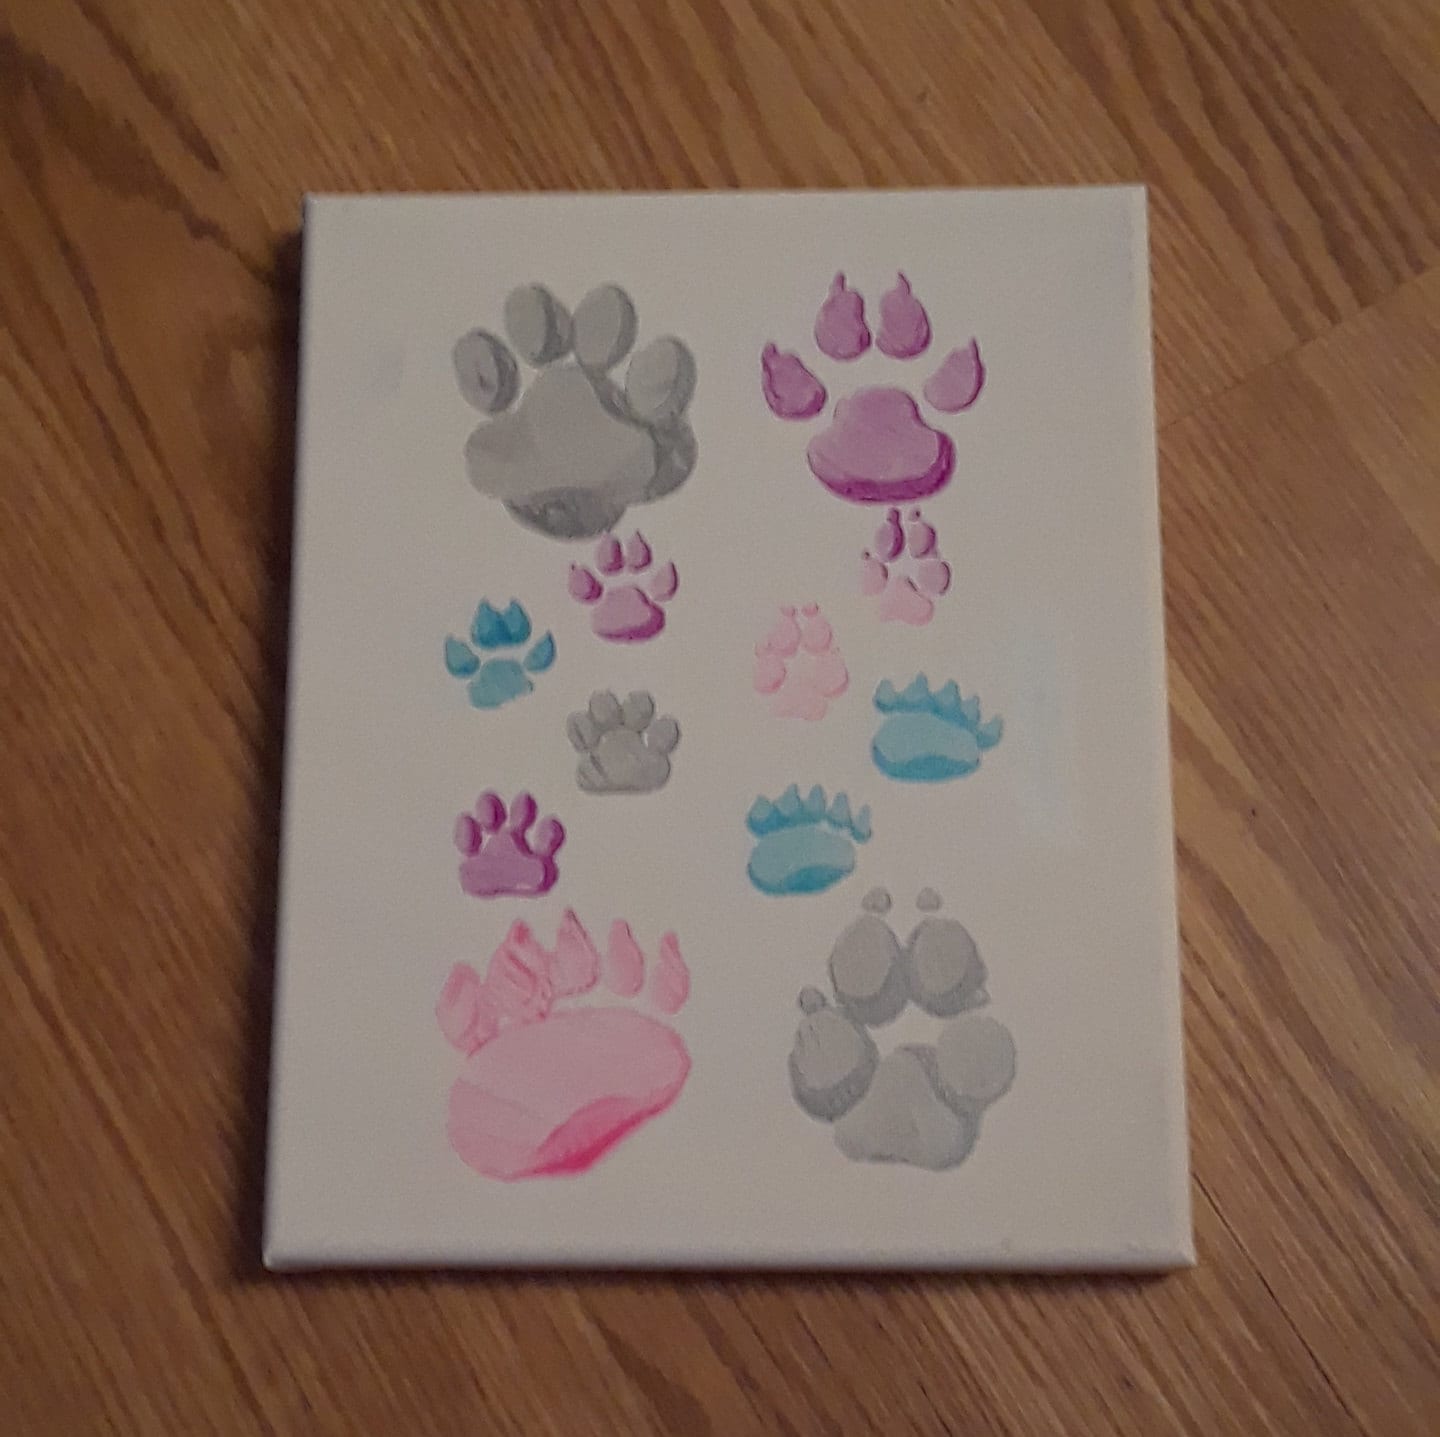 3-D Paw Painting | Etsy